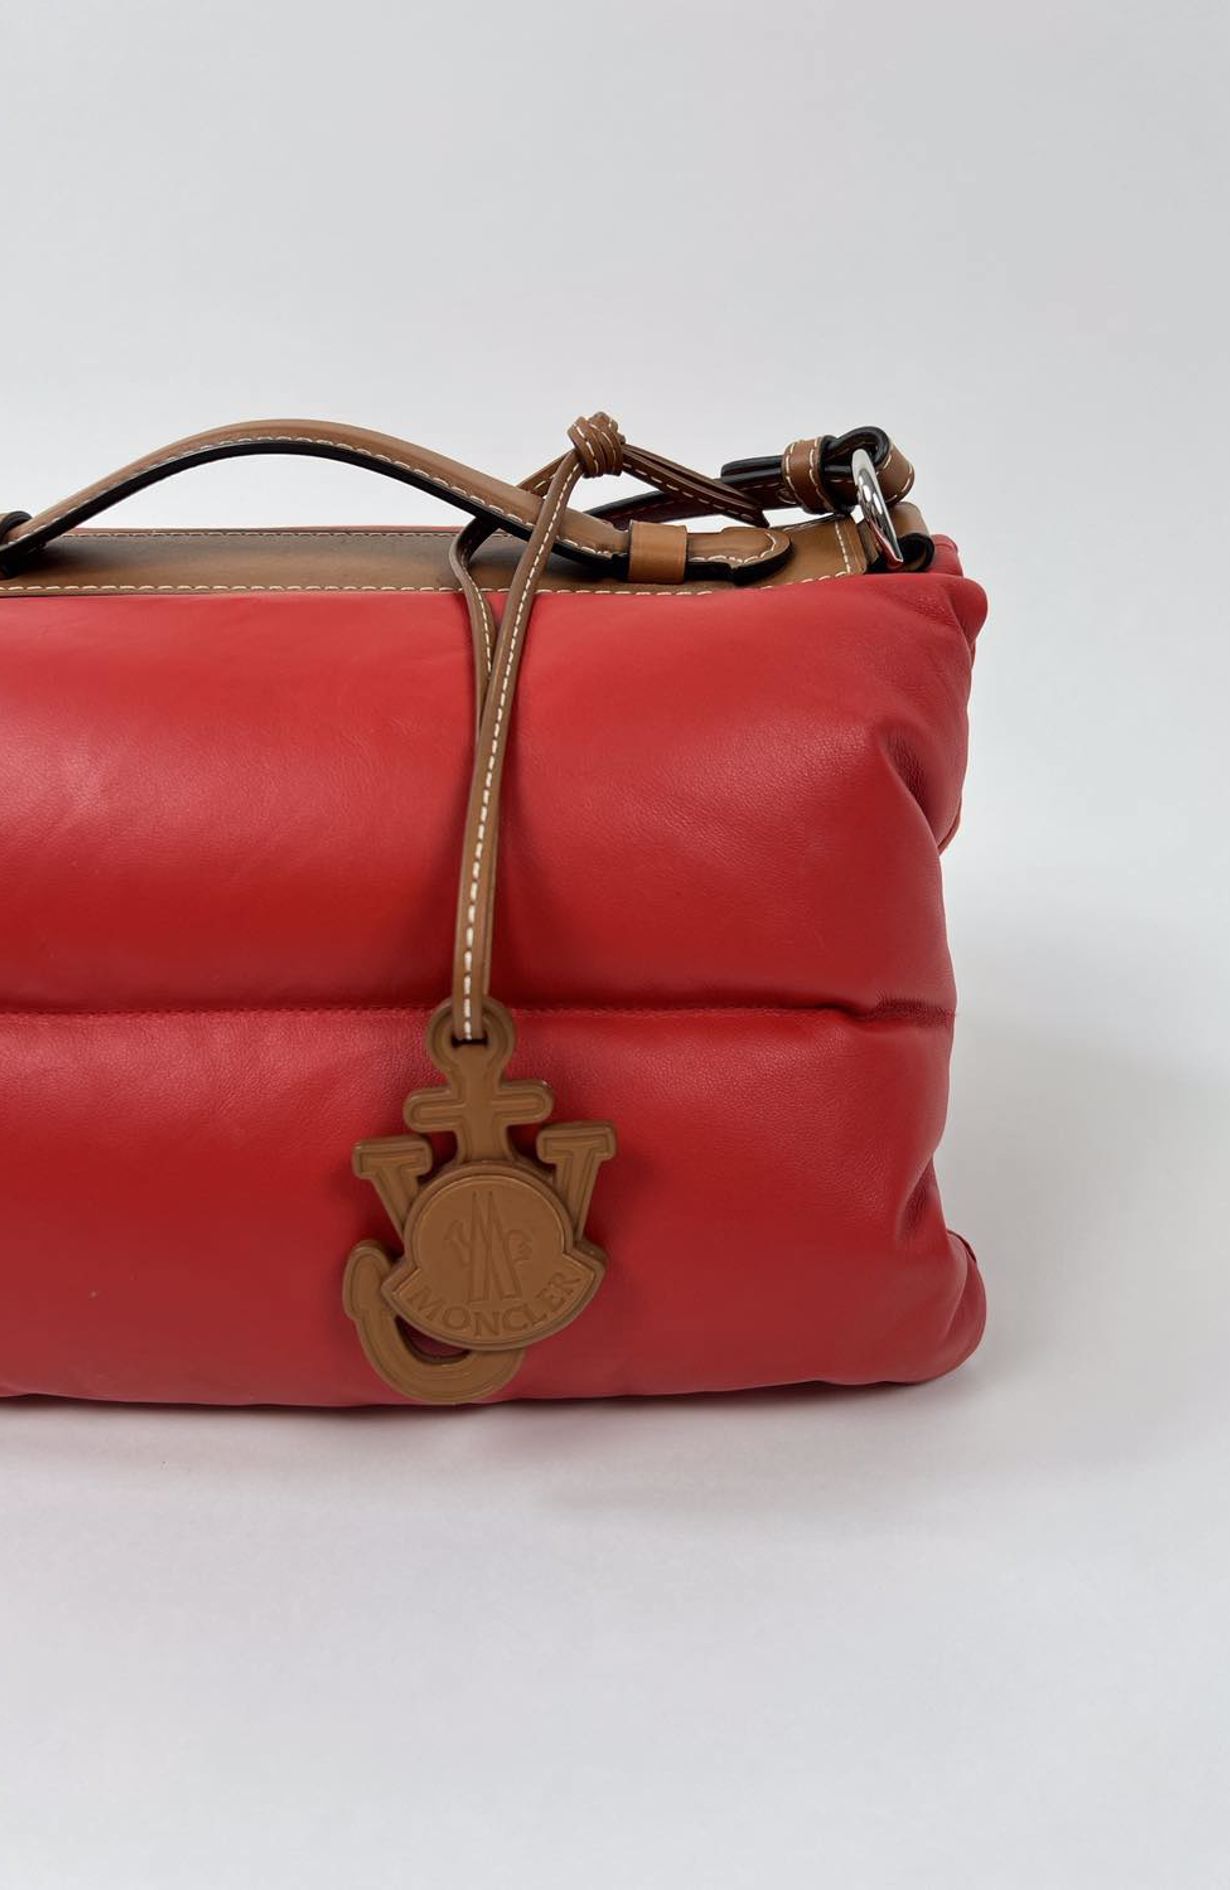 Moncler Bag Puffer Red + Dustbag 